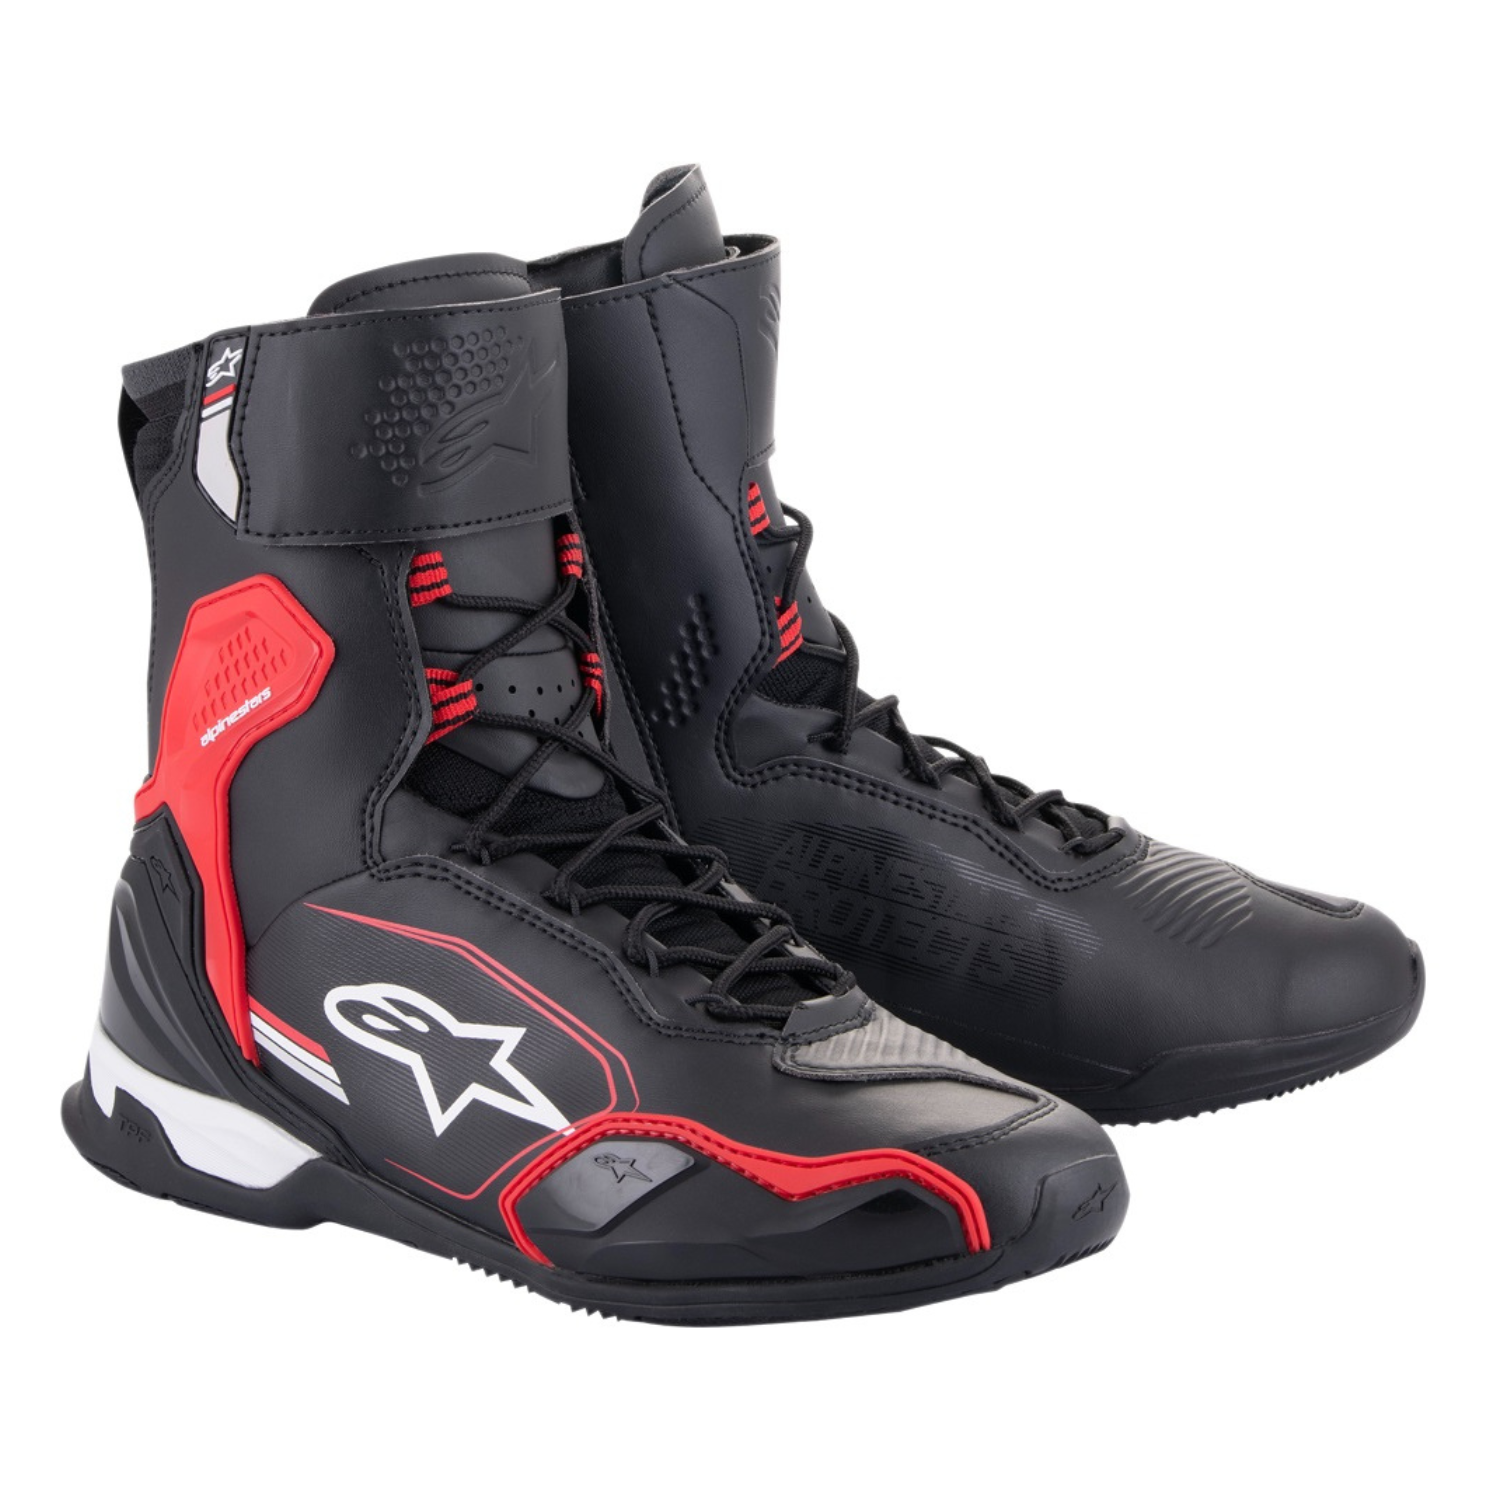 Image of Alpinestars Superfaster Shoes Black Bright Red White Talla US 9